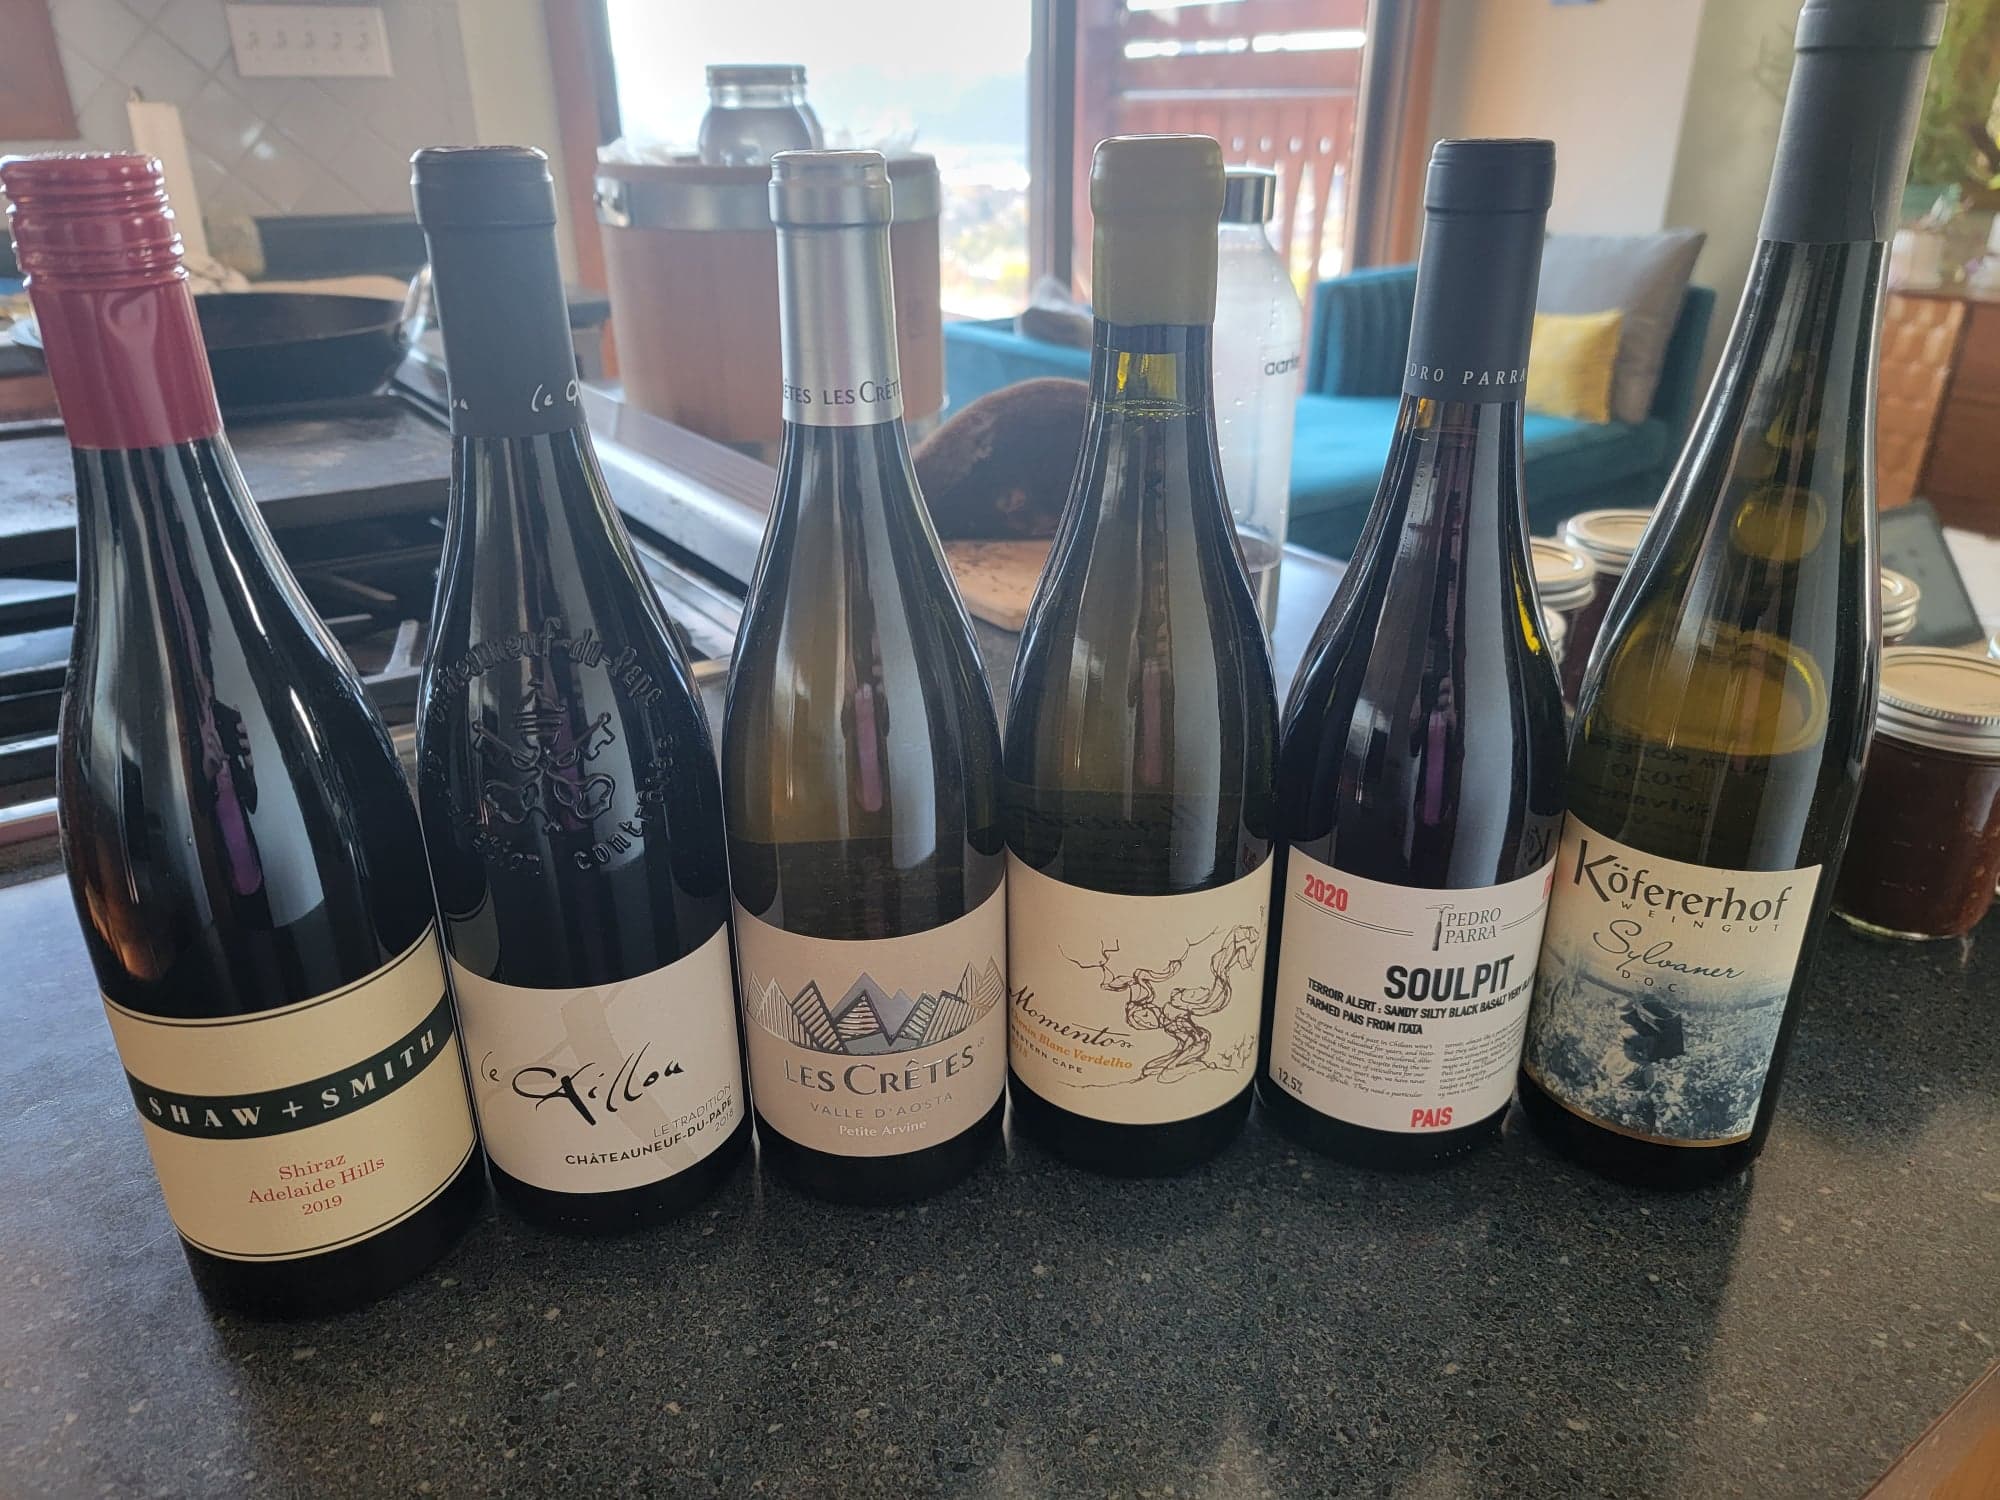 Picked by Wine.com Delivery